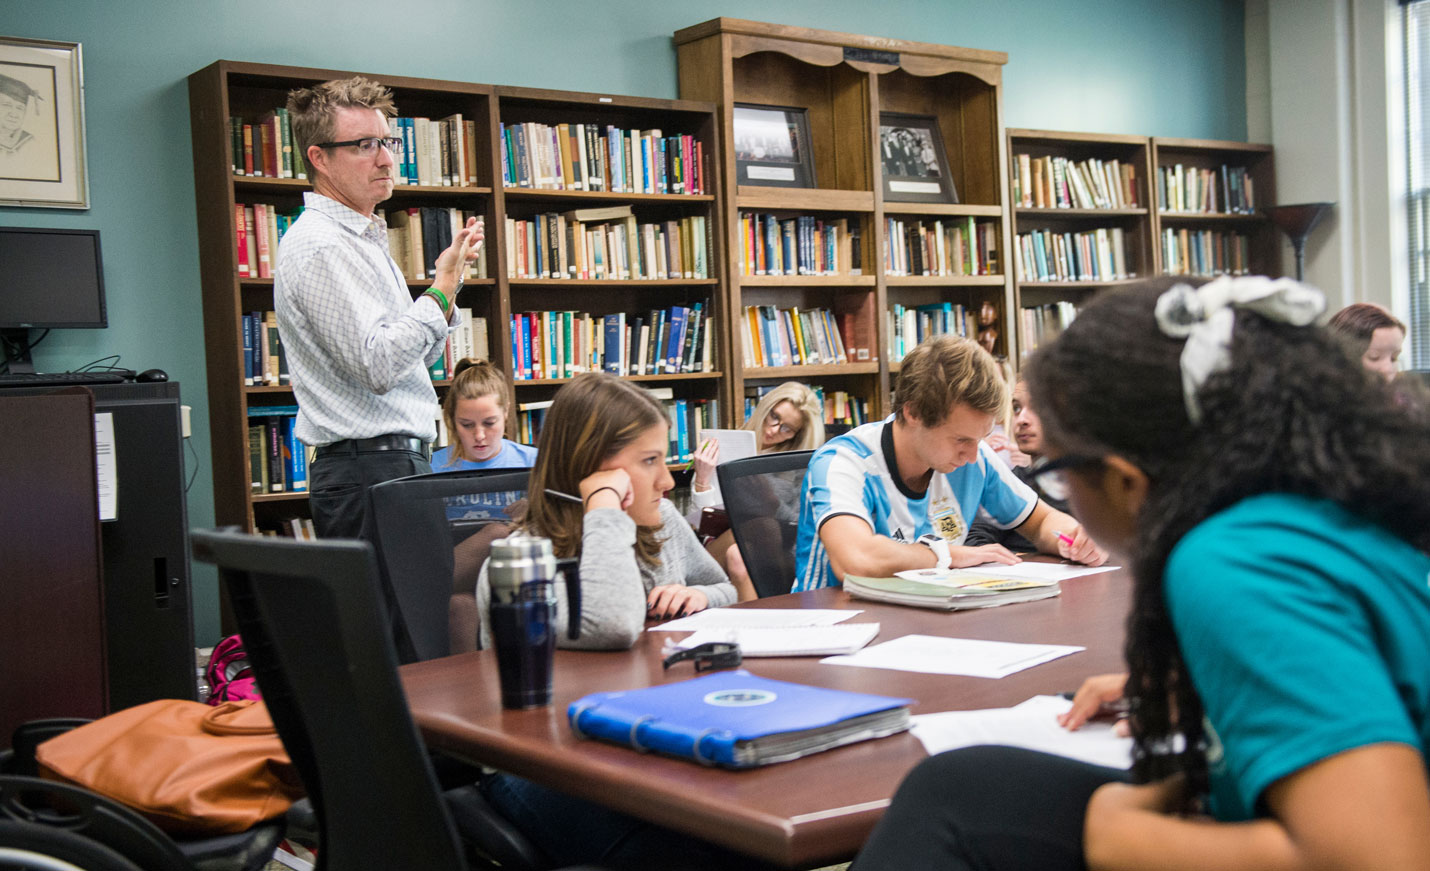 An instructor teaching a group of students seated at tables in front of shelves of books